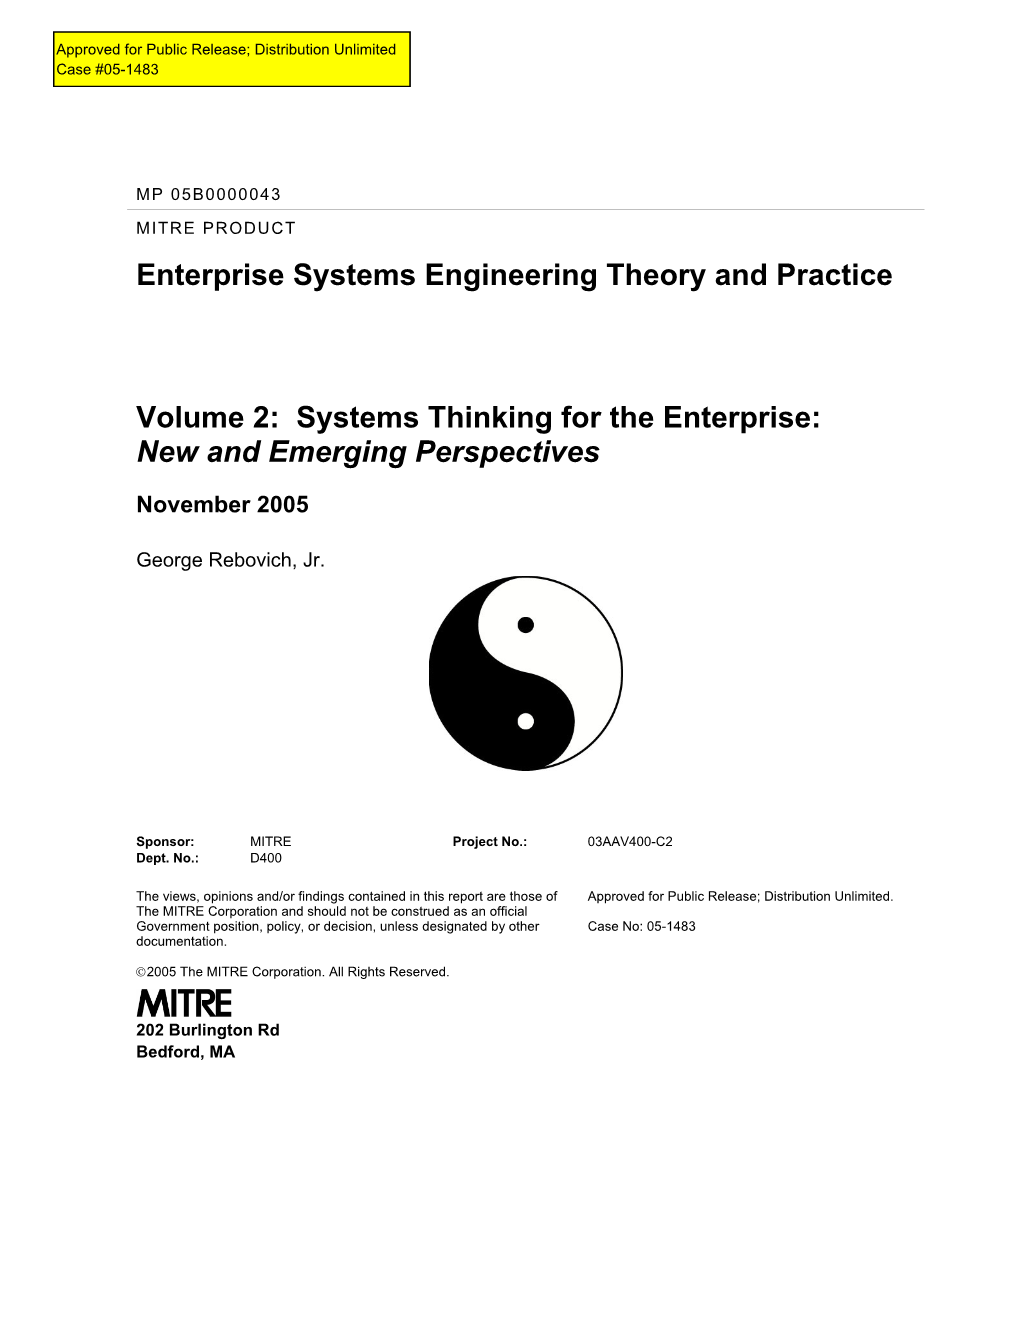 Enterprise Systems Engineering Theory and Practice, Volume 2